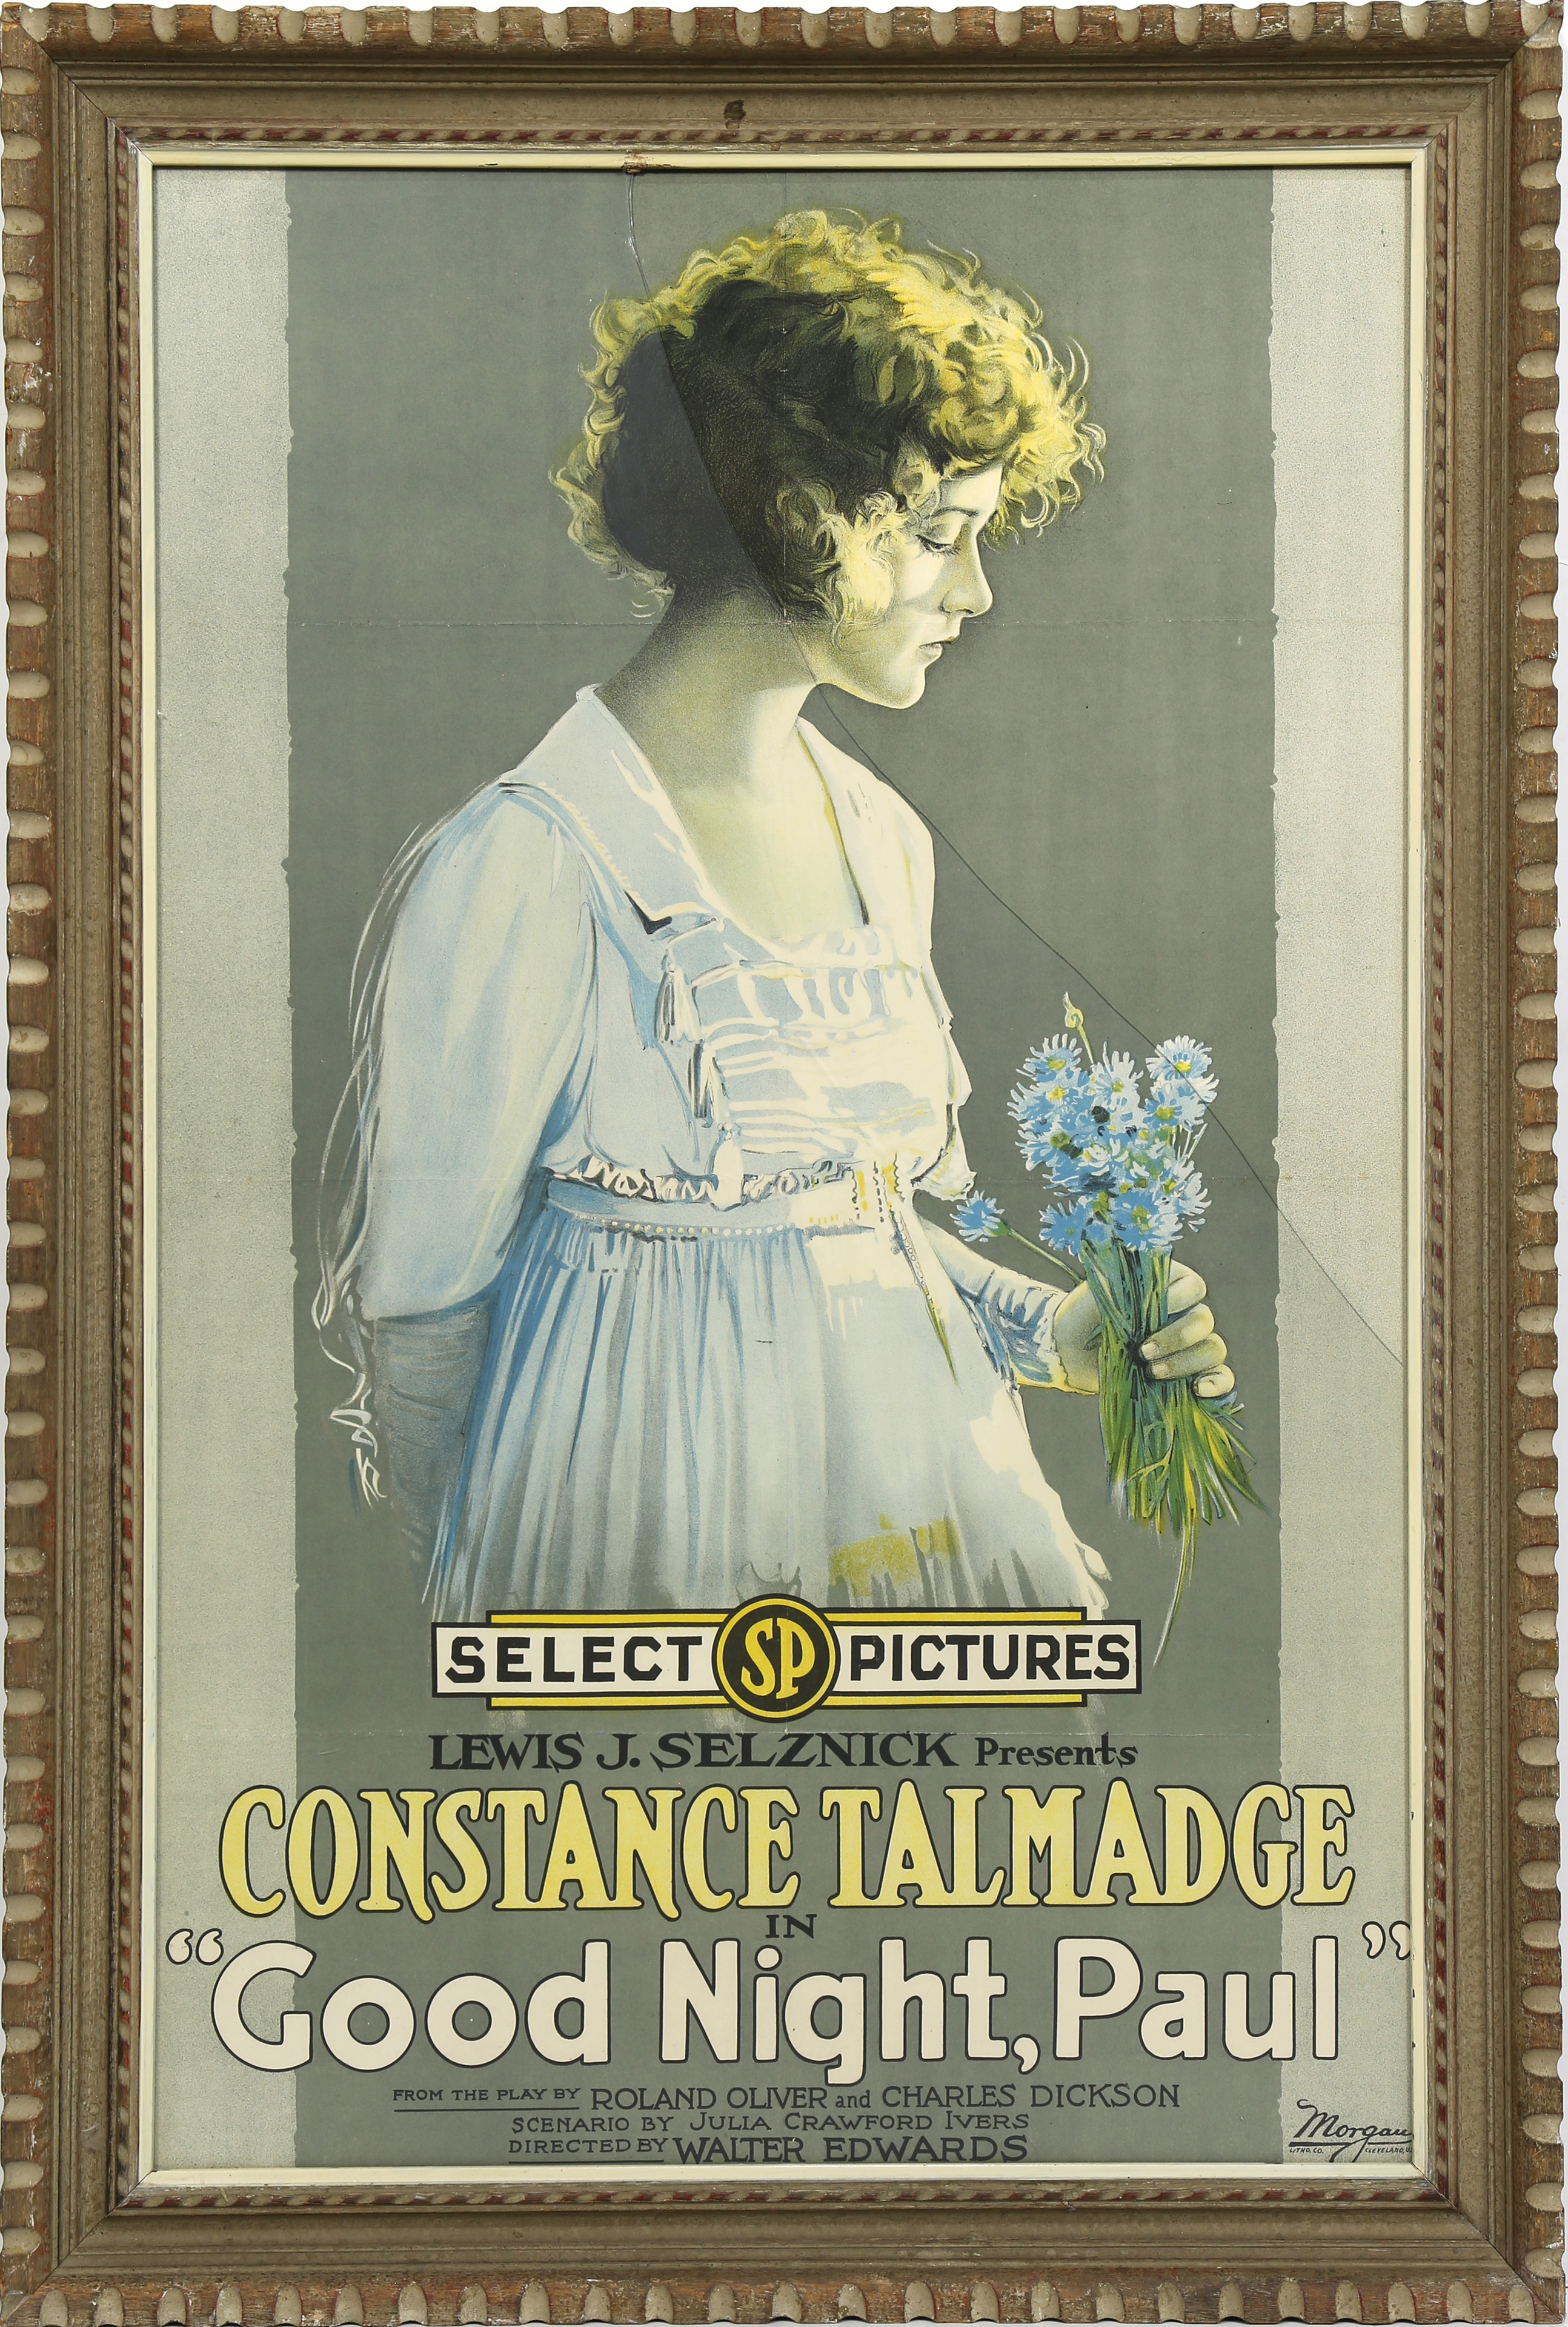 POSTER, CONSTANCE TALMADGE IN "GOOD